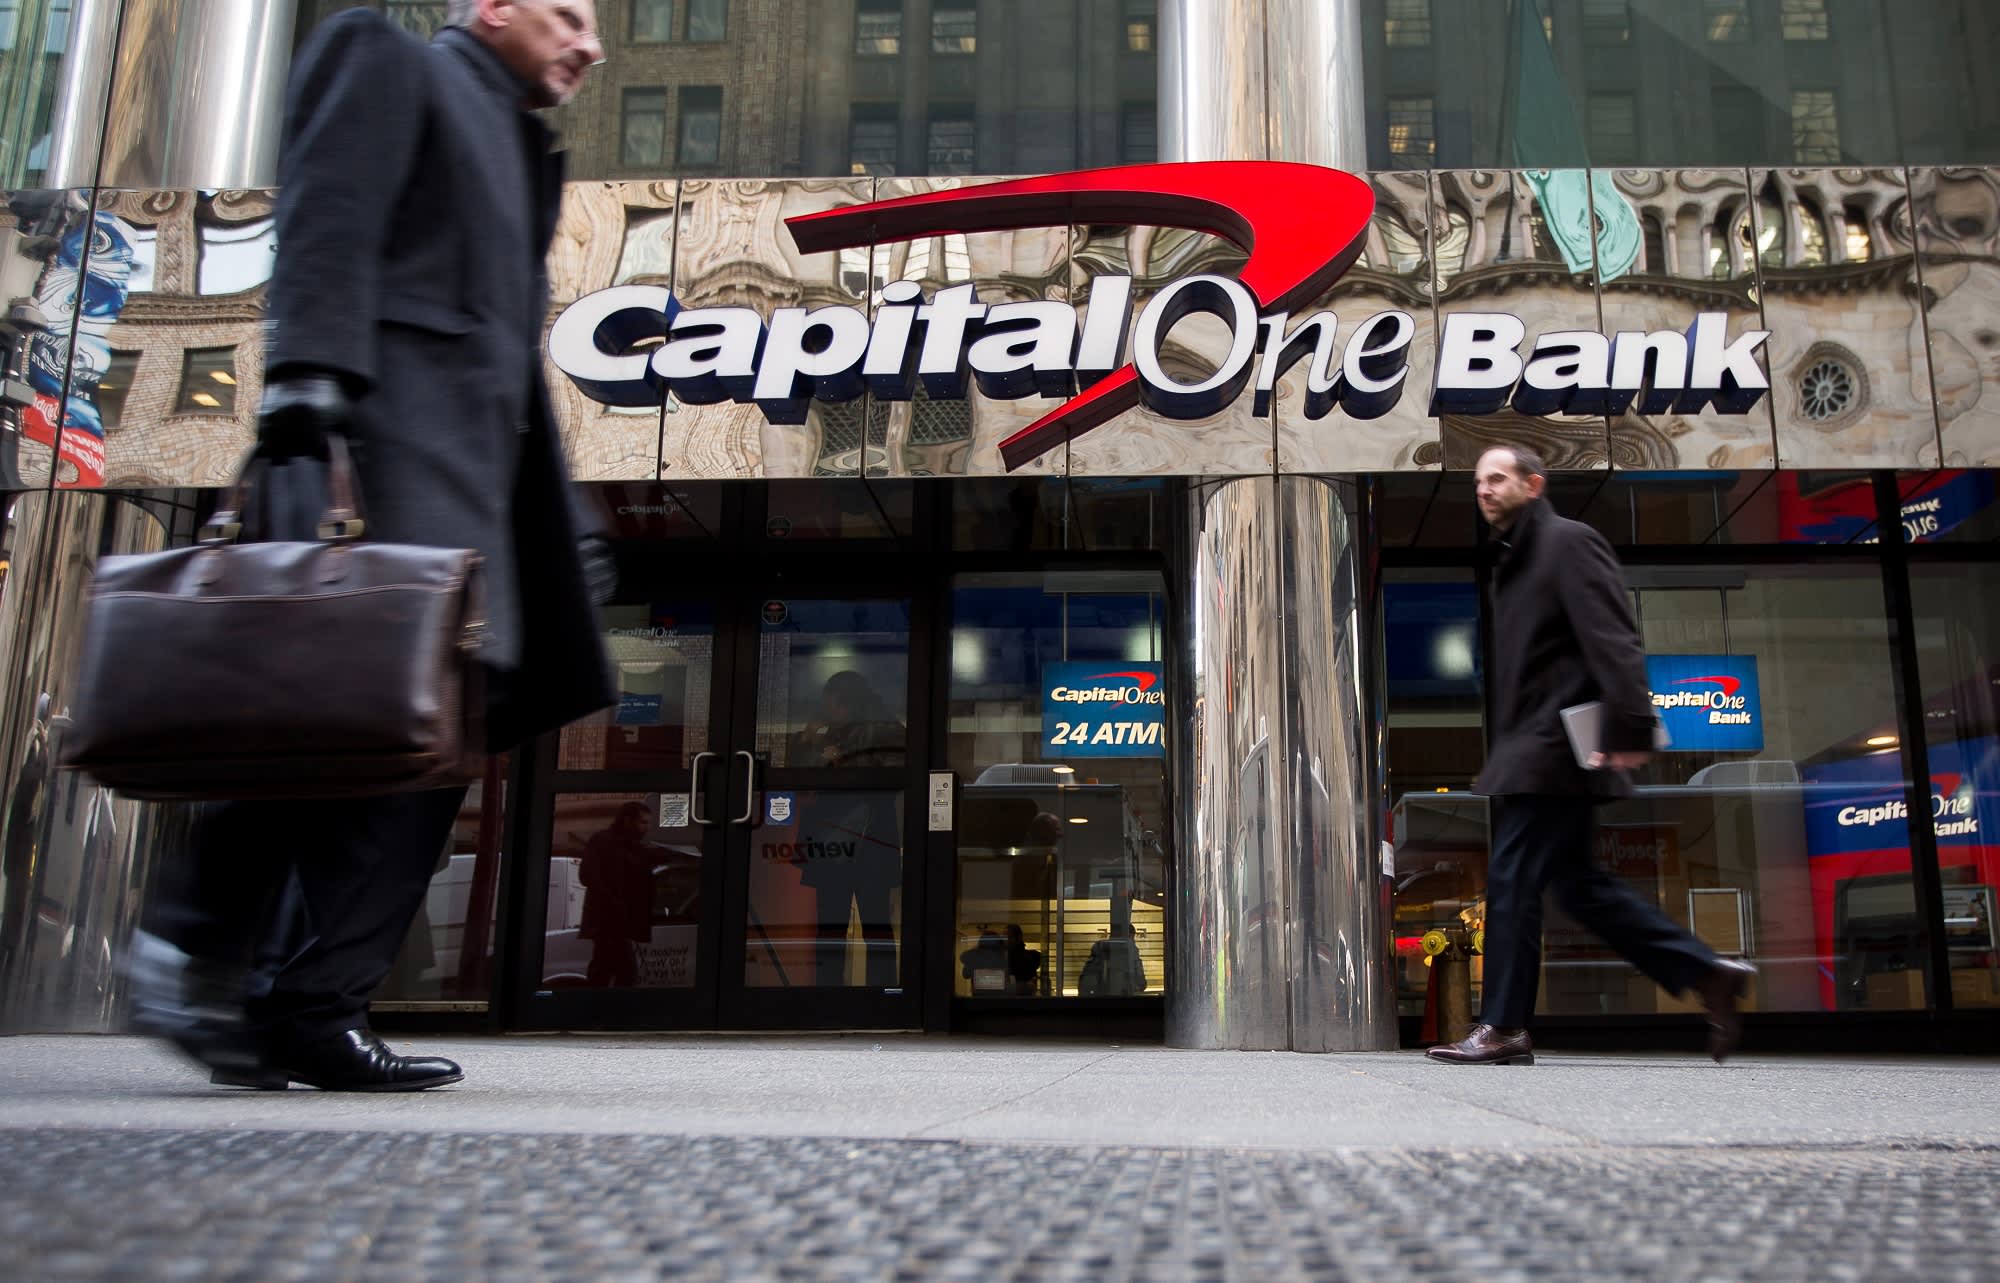 can you get cash out of atm with capital one credit card